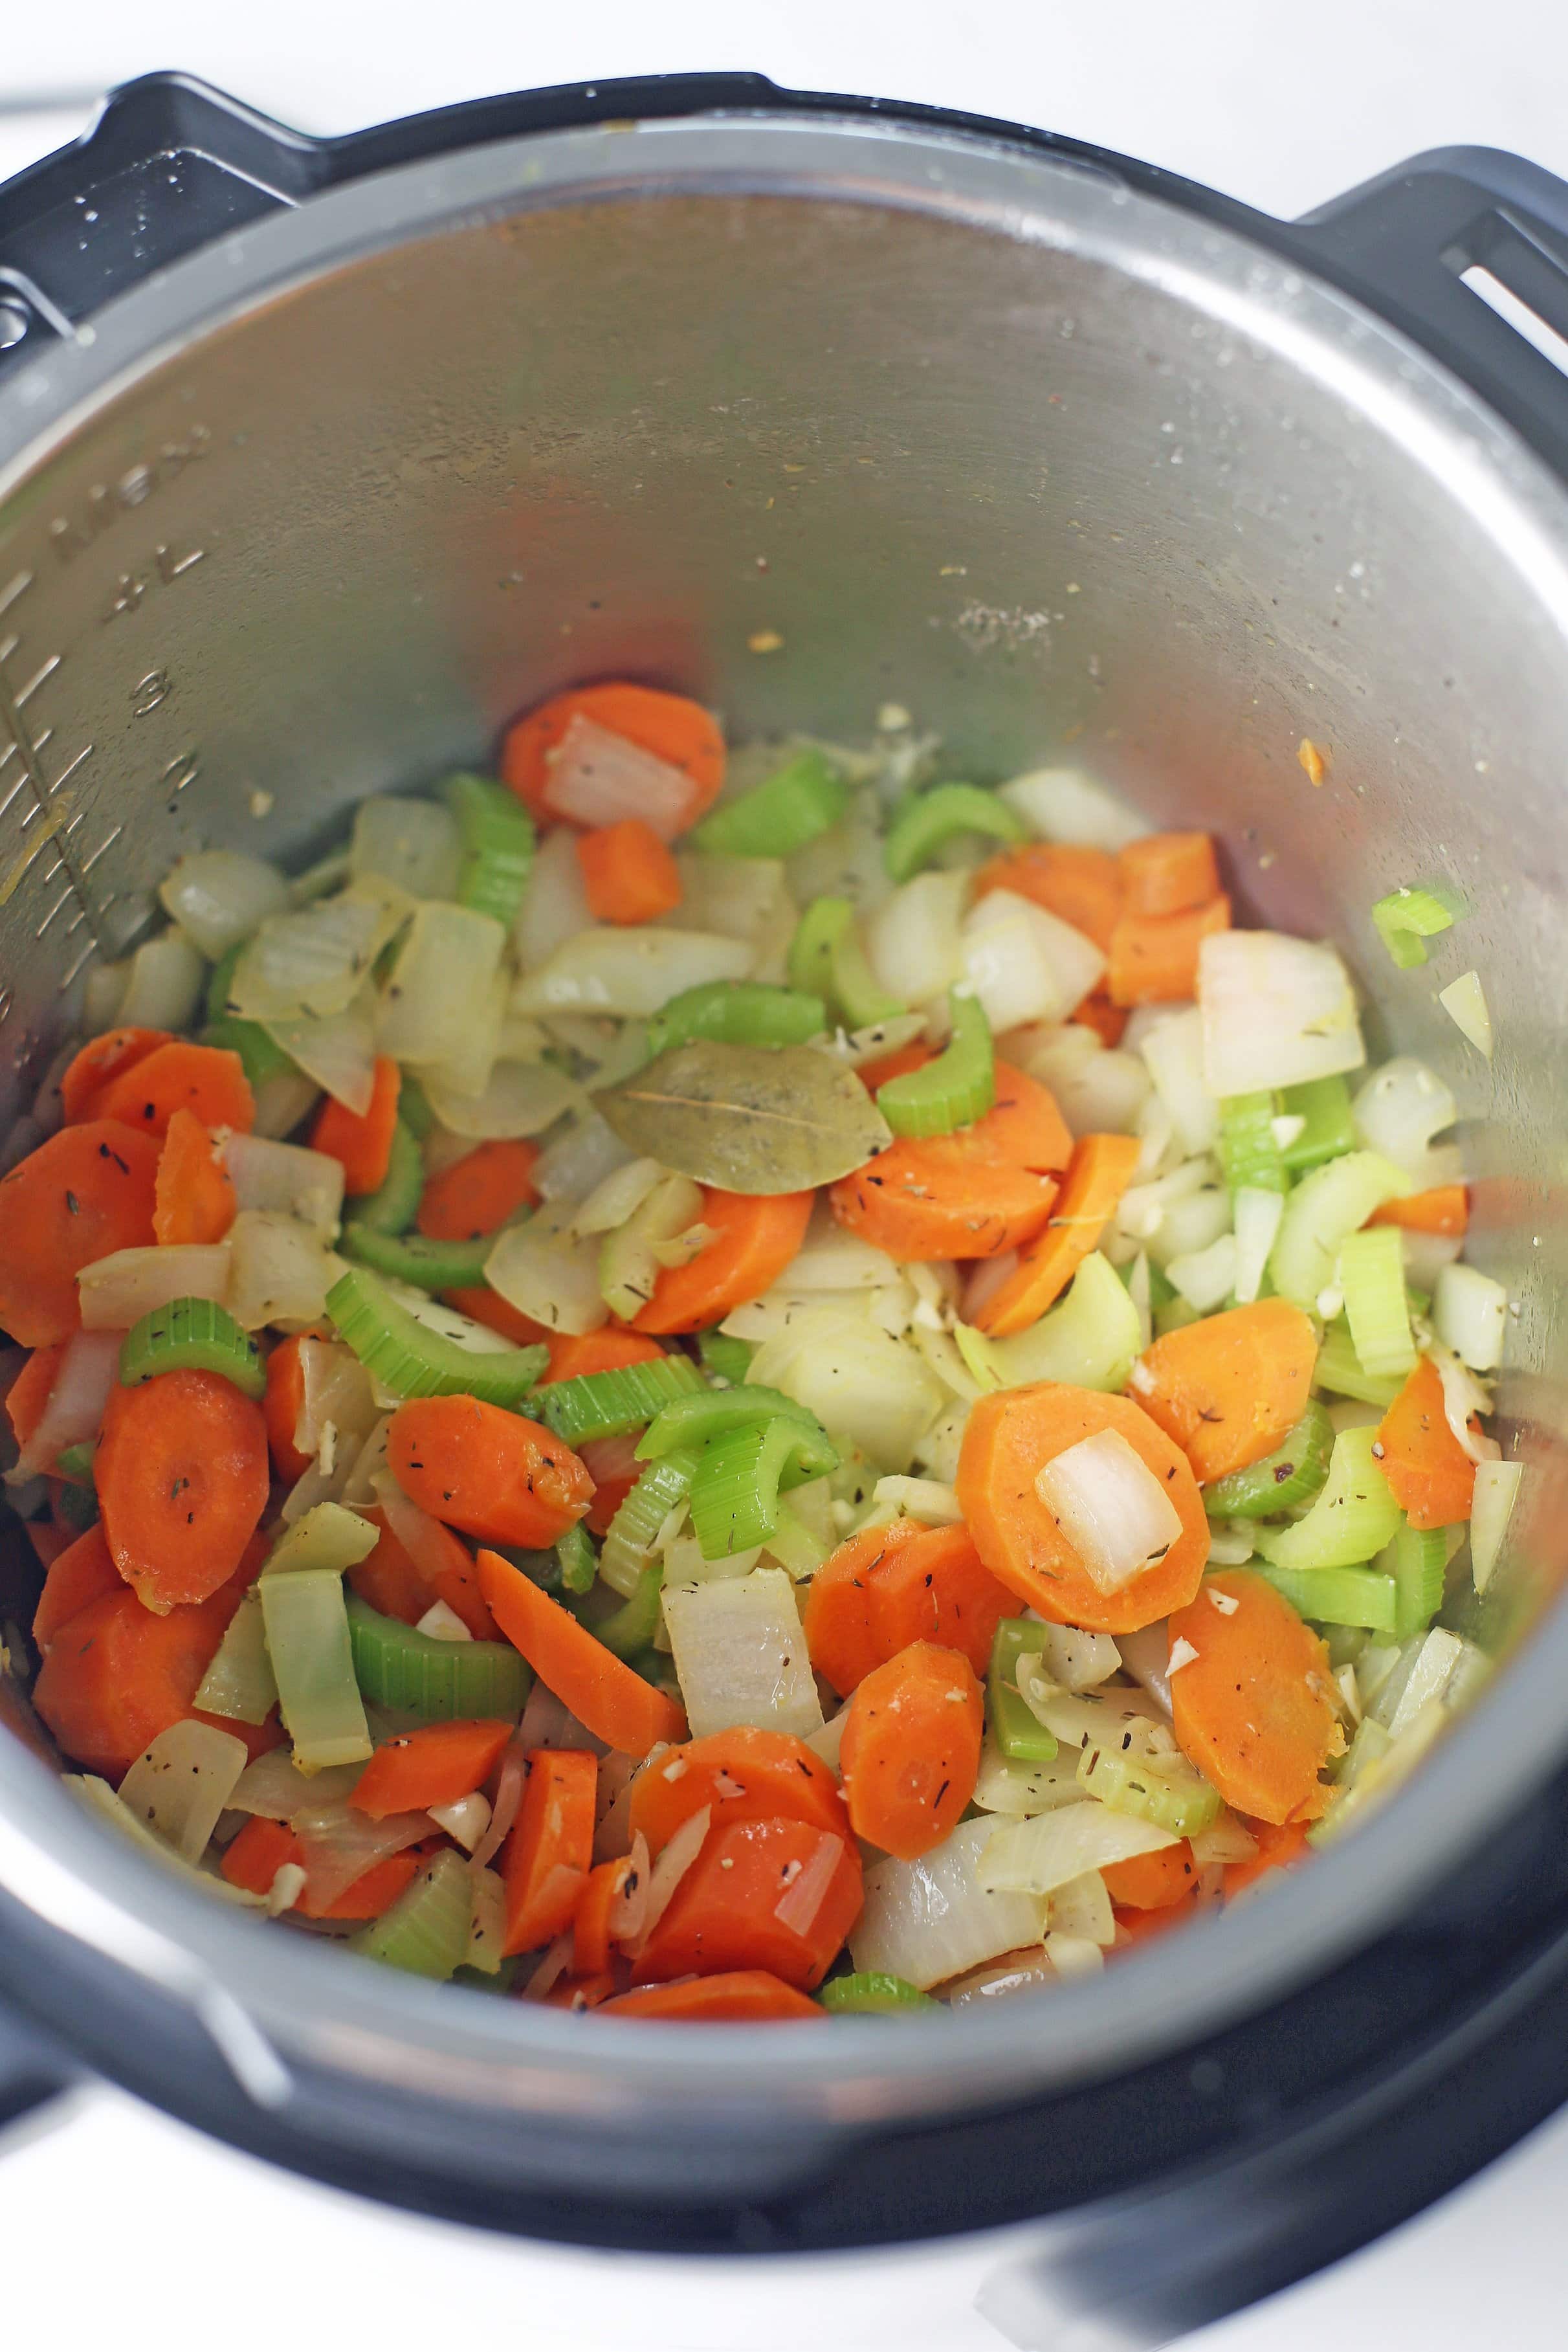 Sautéed carrots, celery, onion, and garlic with dried thyme and bay leaves in the Instant Pot.